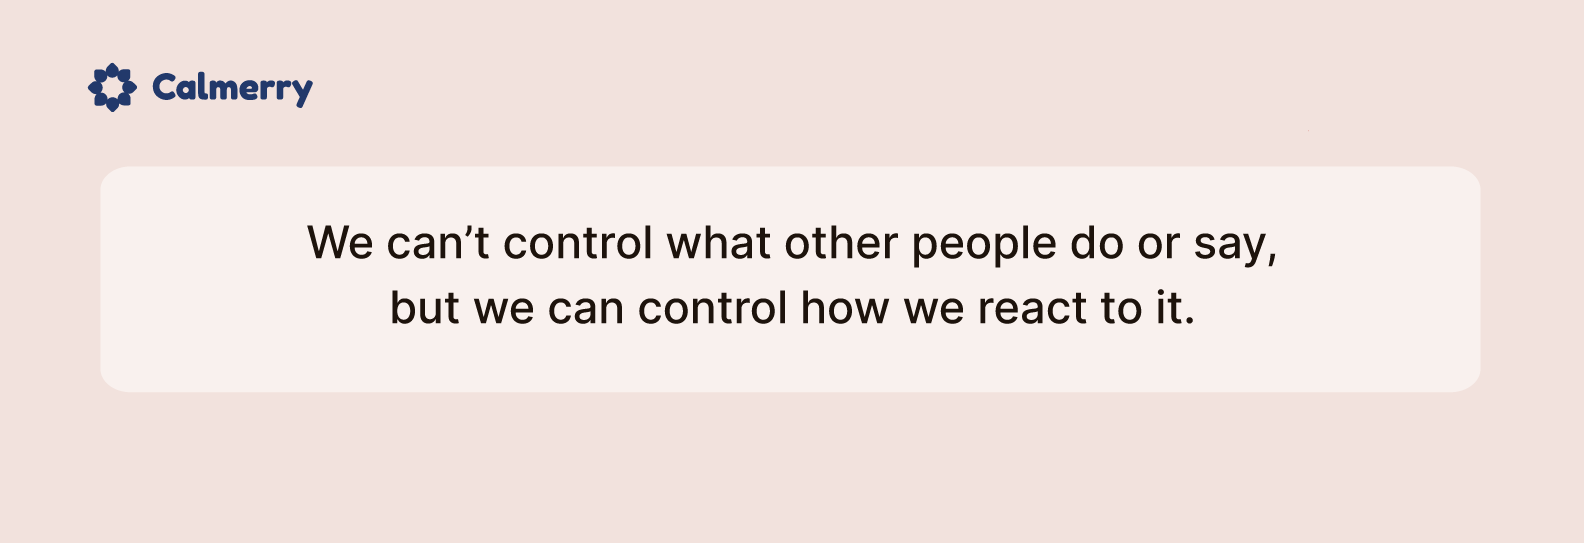 We can’t control what other people do or say